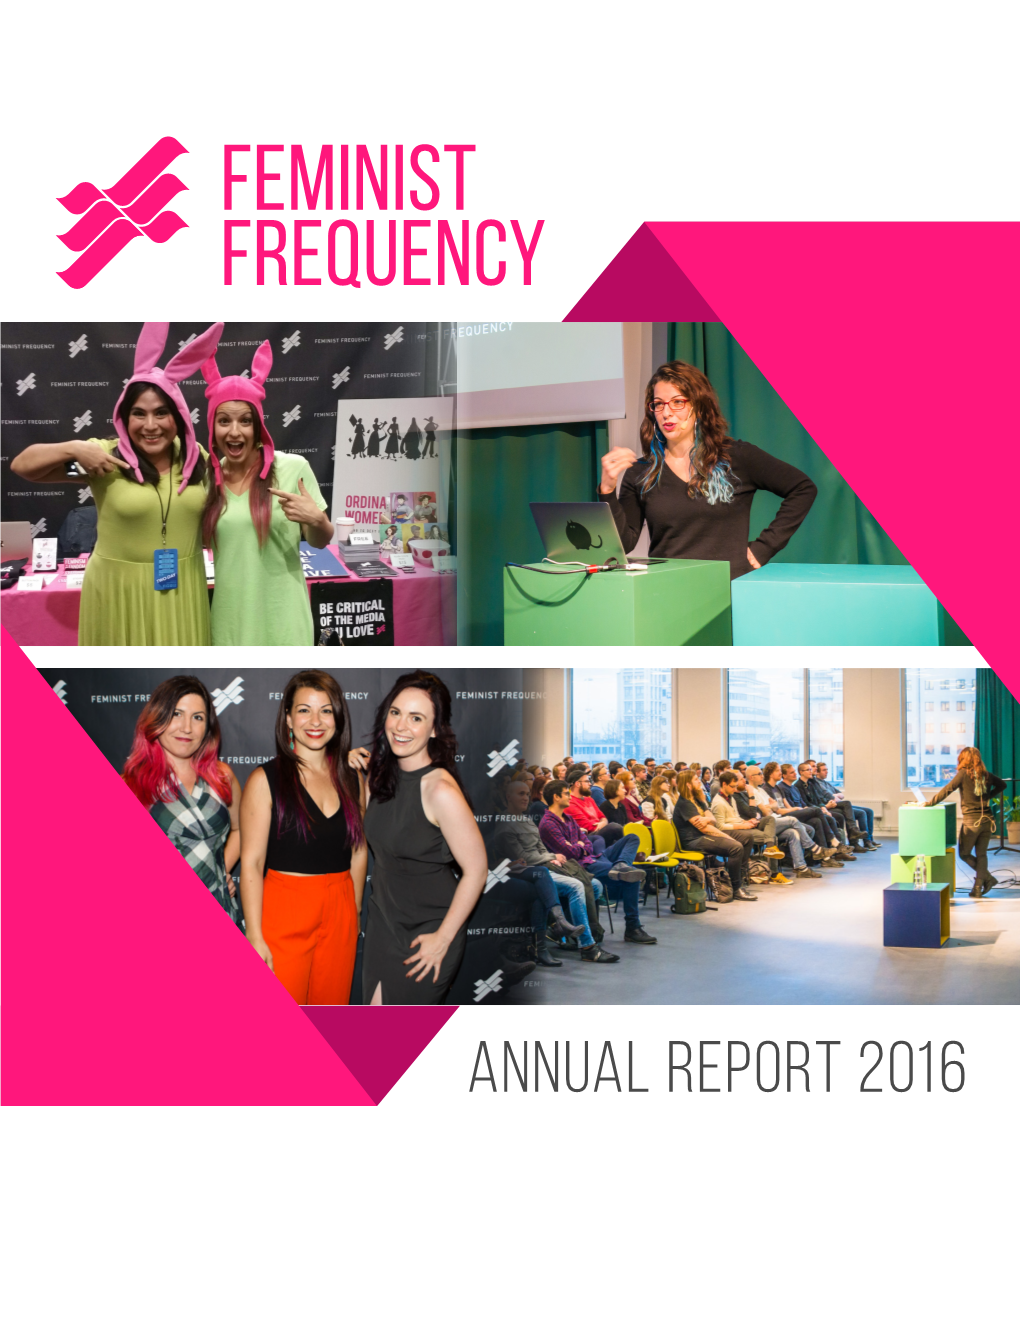 Read Feminist Frequency's Annual Report for 2016